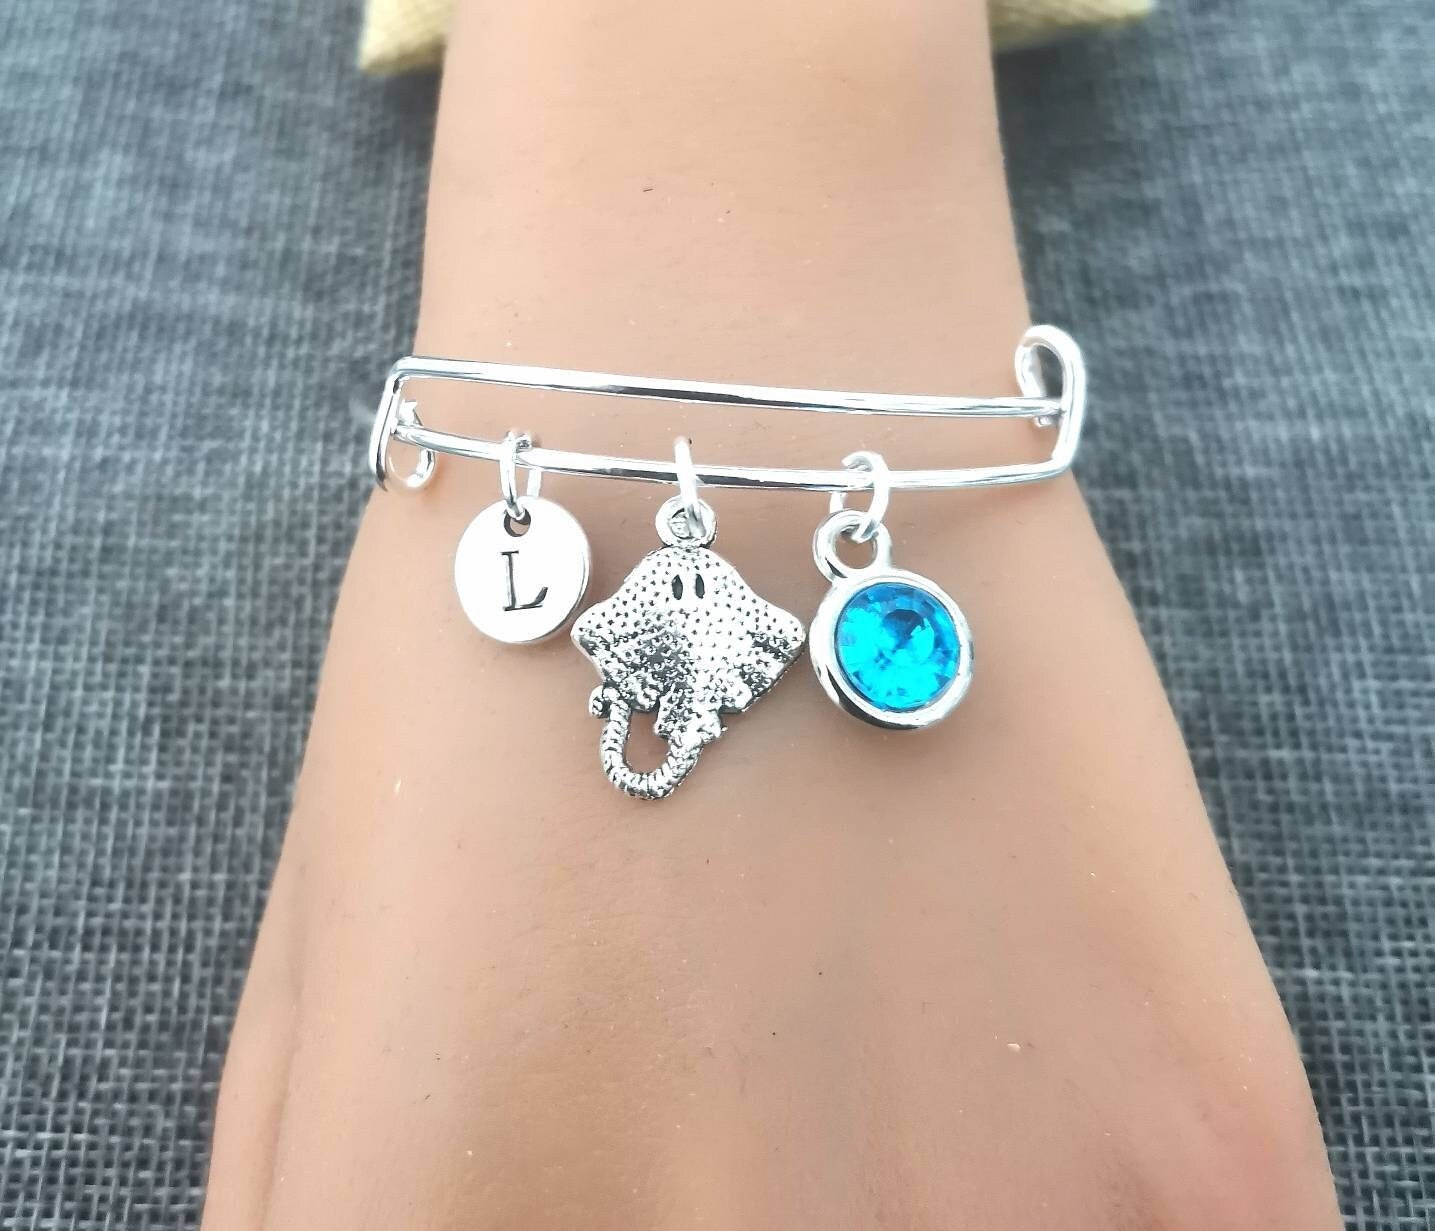 Sting ray Bracelet, Sting ray Jewelry, Sting ray Jewelry, Stingray Bracelet, Sea life, Birthday gift, Gift for her, Beach, Sea life, Ocean